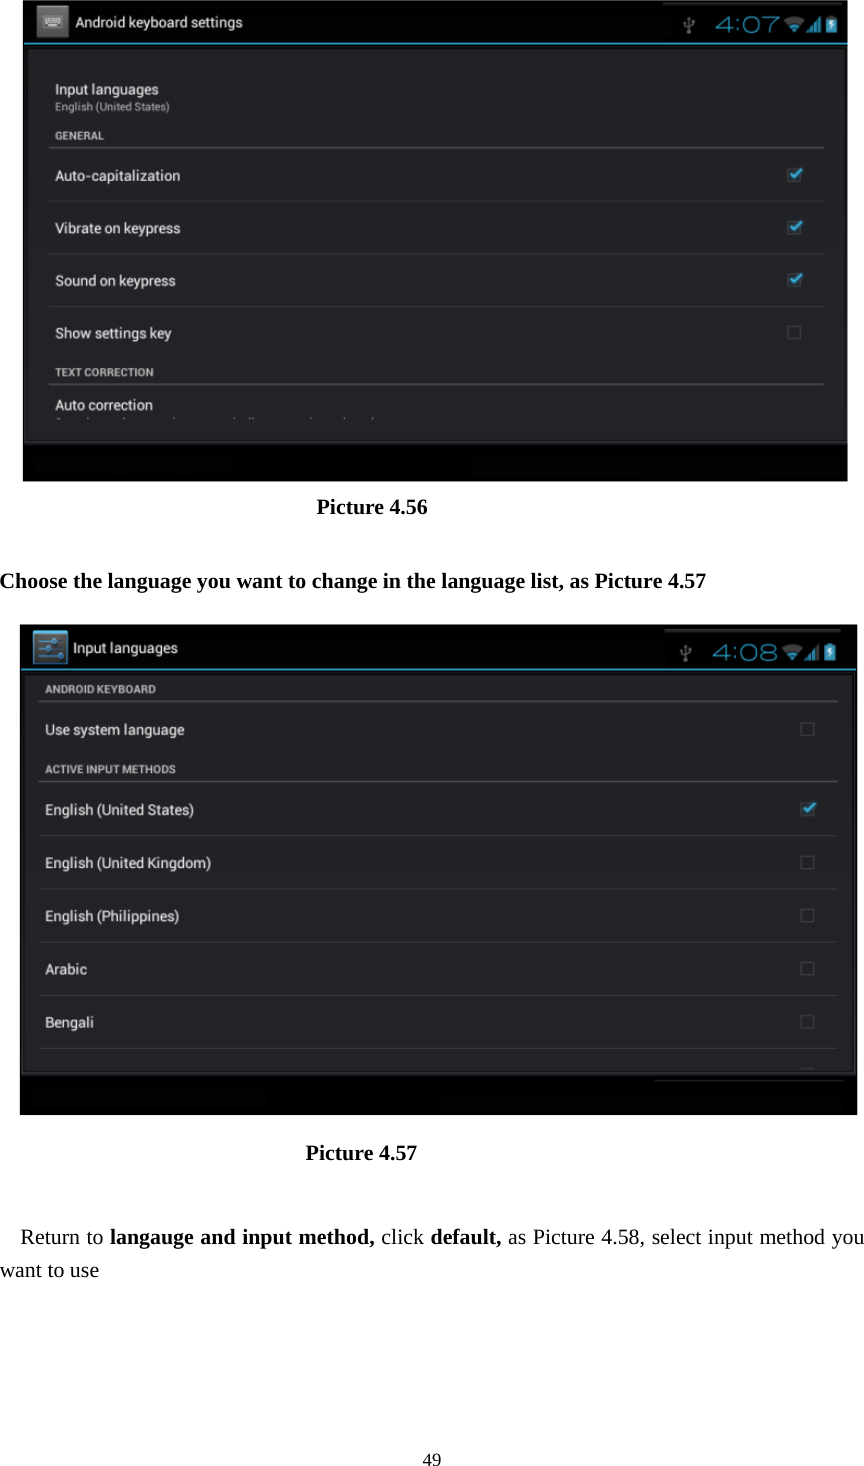     49                              Picture 4.56  Choose the language you want to change in the language list, as Picture 4.57                              Picture 4.57  Return to langauge and input method, click default, as Picture 4.58, select input method you want to use 